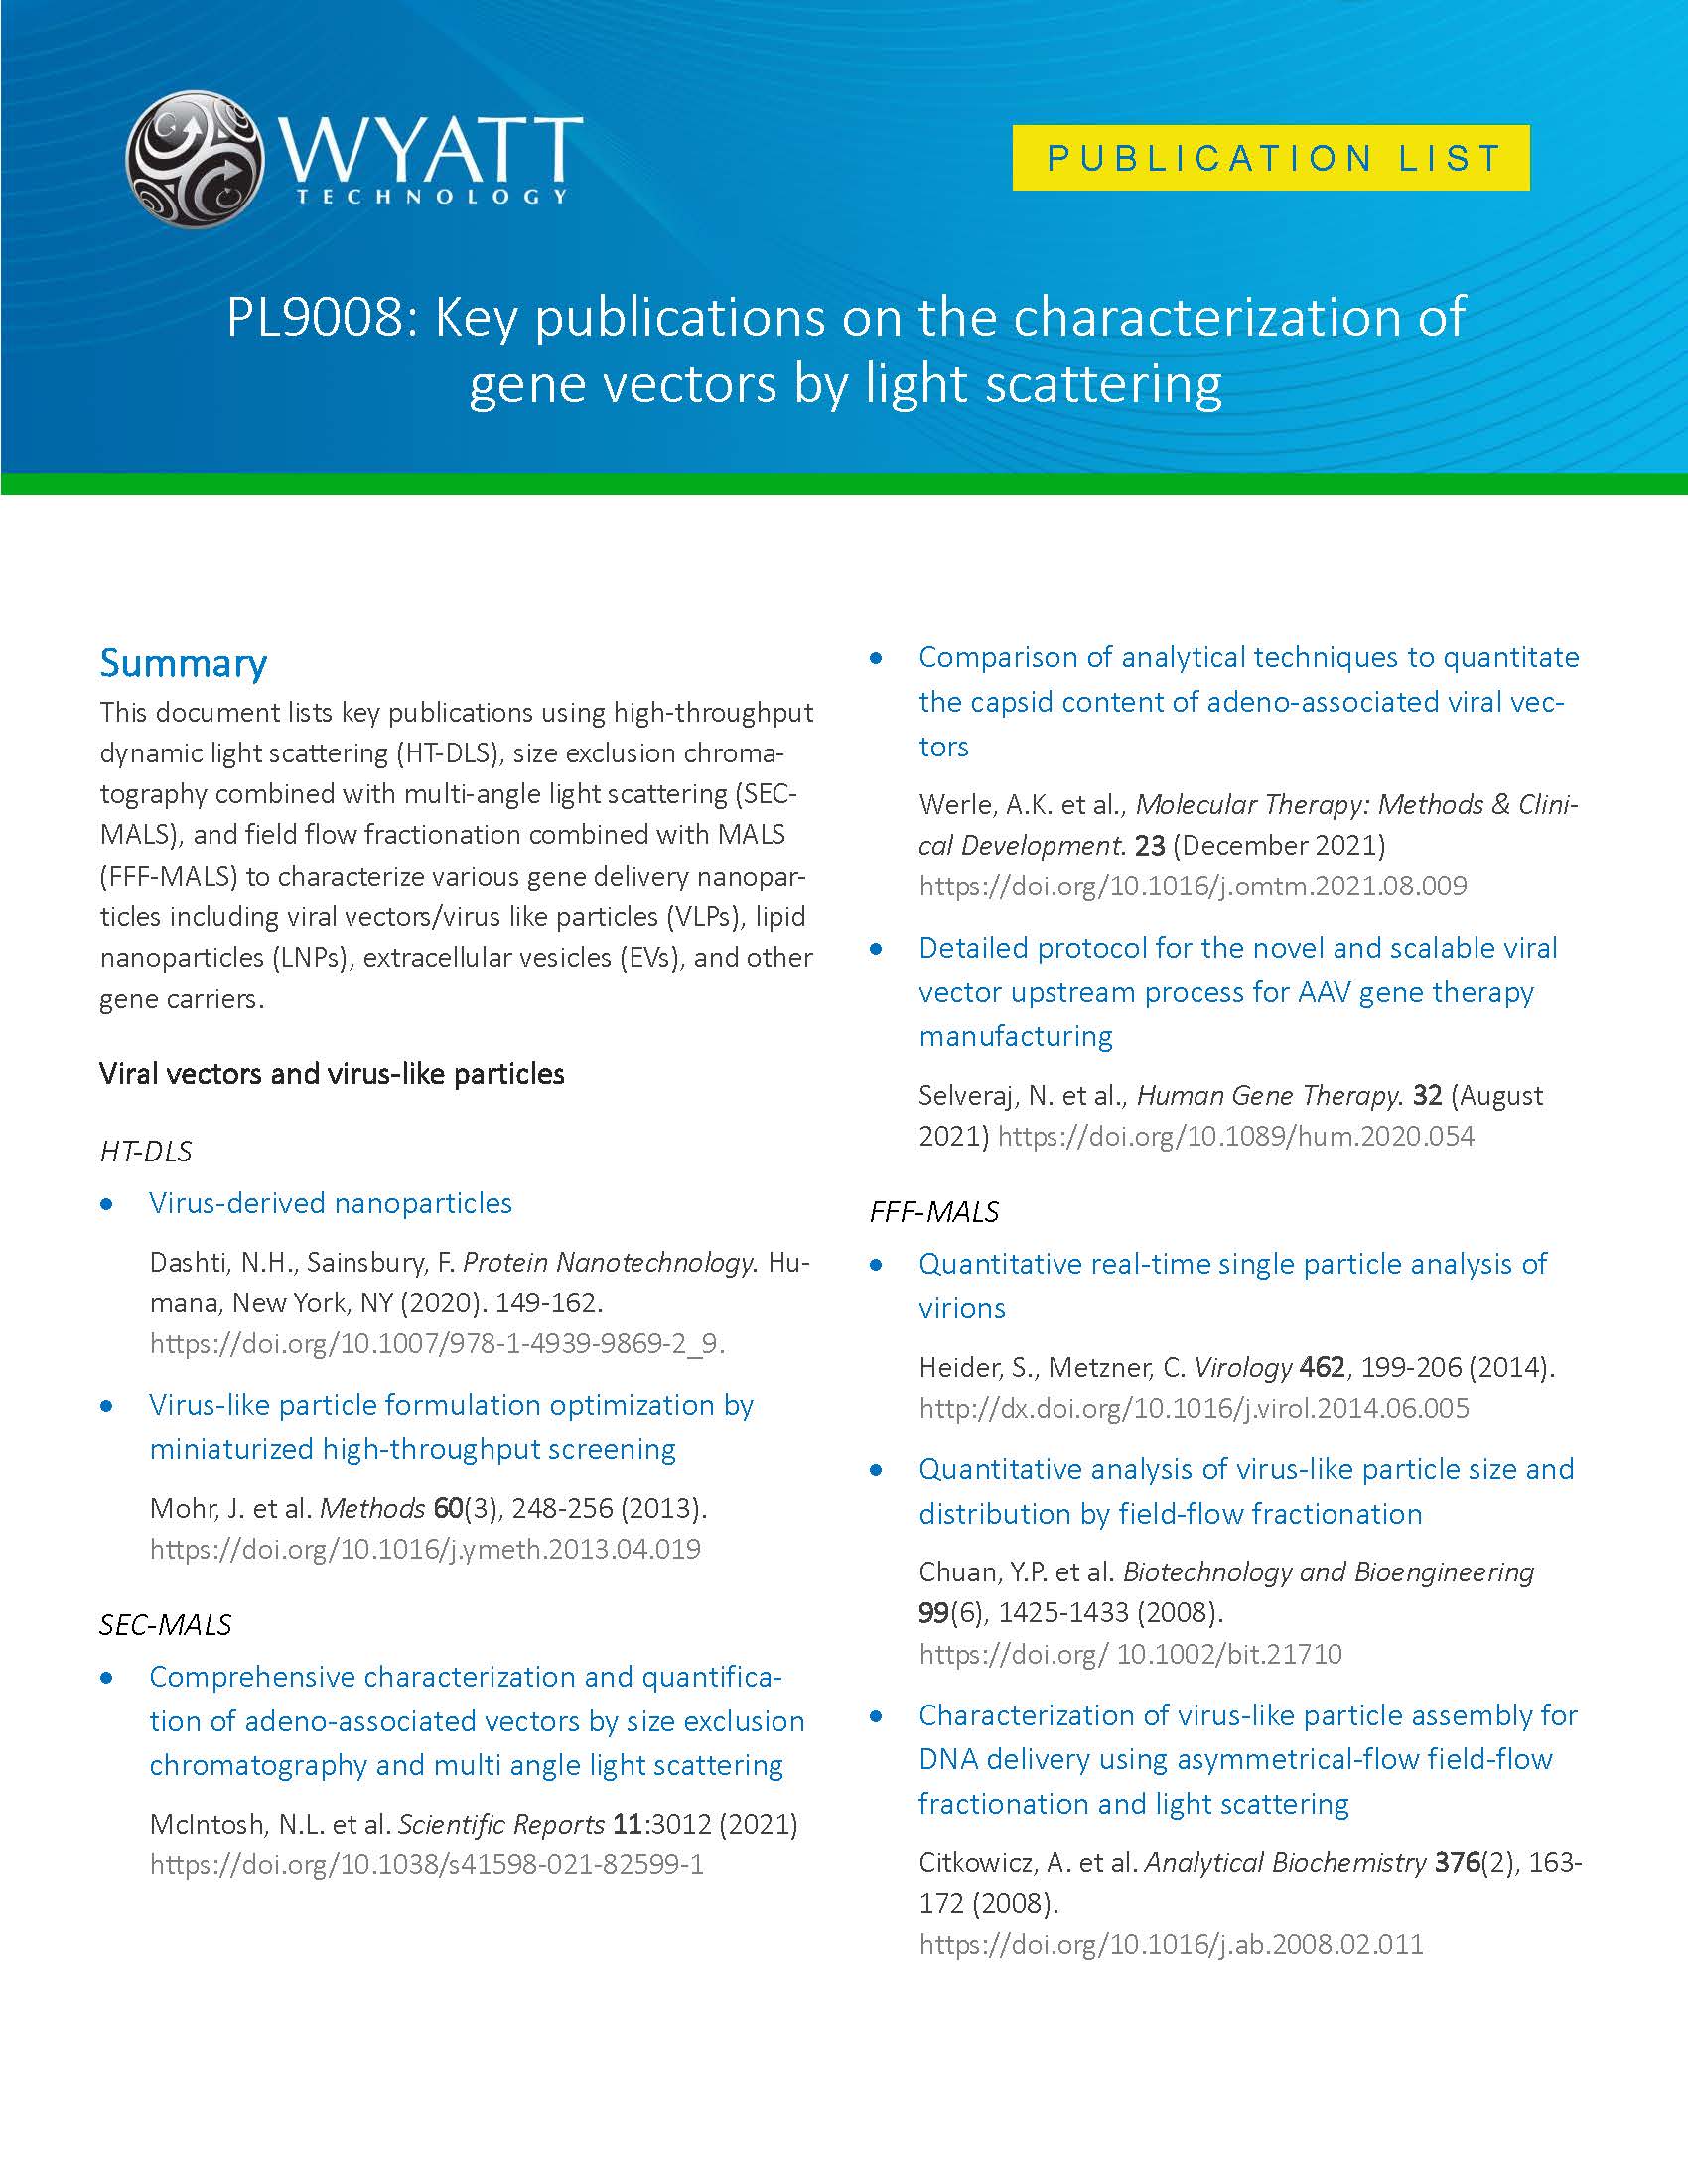 PL9008-Key-publications-on-the-characterization-of-gene-vectors-by-light-scattering_Page_1